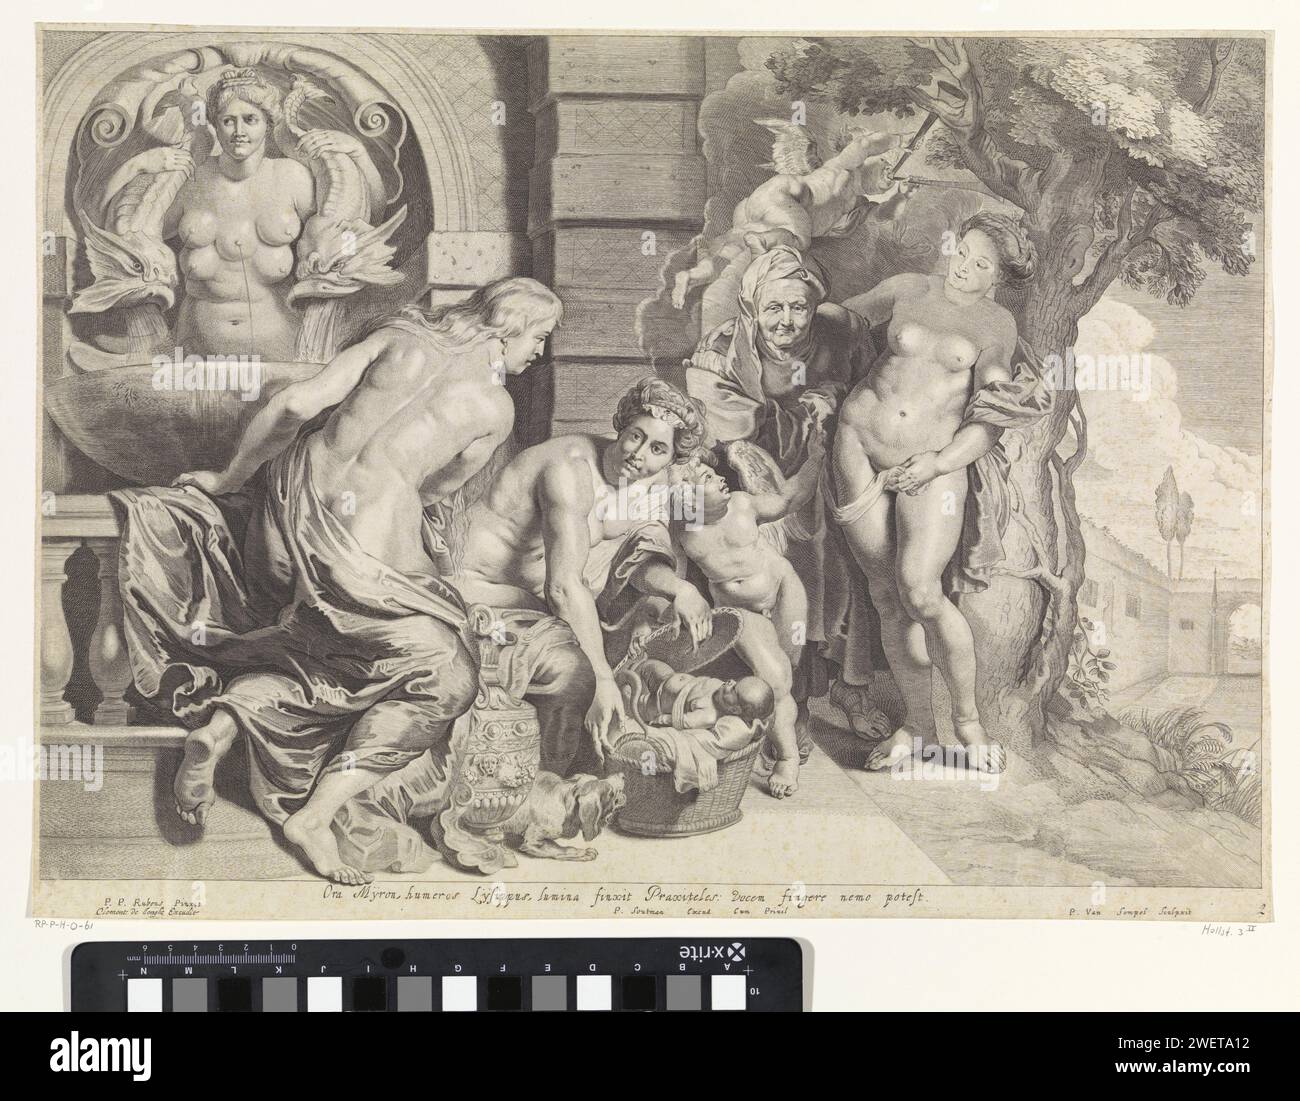 Erichthonius in his basket, Pieter van Sompel, after Peter Paul Rubens, c. 1640 - c. 1670 print The three daughters of King Cecrops open the basket with Erichthonius entrusted to them by Minerva. A dog grumbling together when he sees the legs of the baby, ending in snake tails. On the left a fountain with the representation of Diana van Ephesus, who here proposes Mother Earth (Gaea), the mother of the Kleine Erichthonius. Under the image a verse in Latin of the Polish poet Maciej Kazimierz Sarbiewski. Scene from Ovidius' Metamorphosen (with. II, 553-563).  paper engraving Erichthonius, hidden Stock Photo